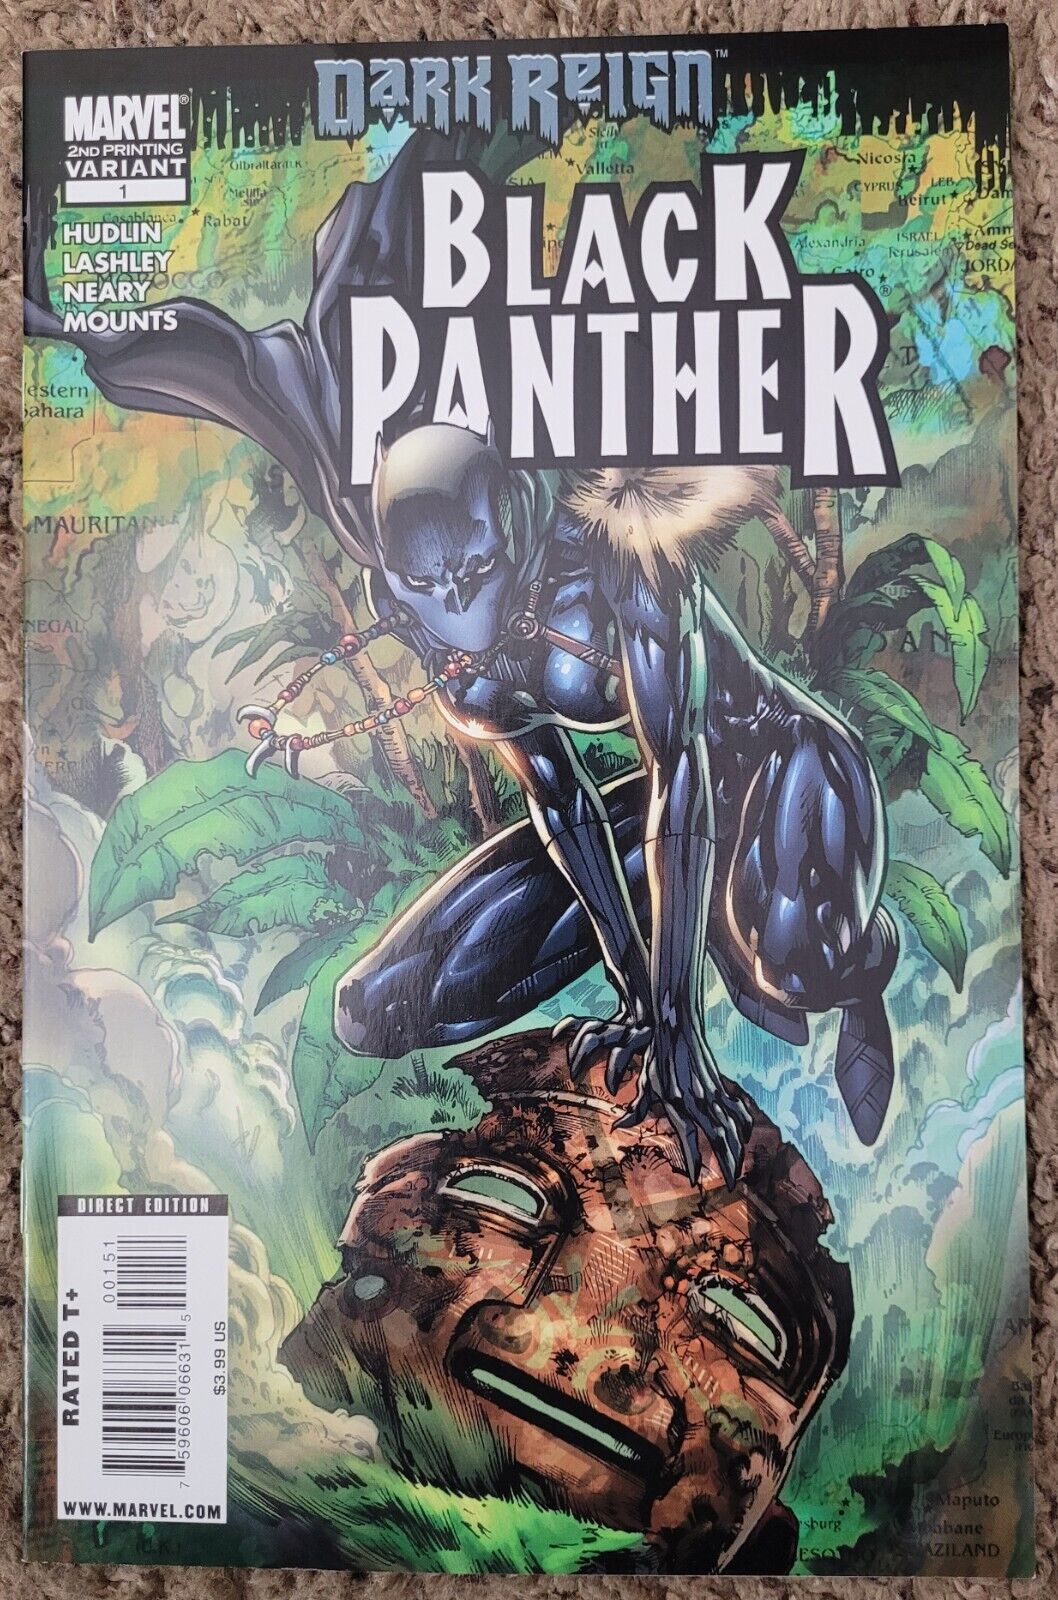 Black Panther Issues #1-6 Dark Reign Marvel Comics